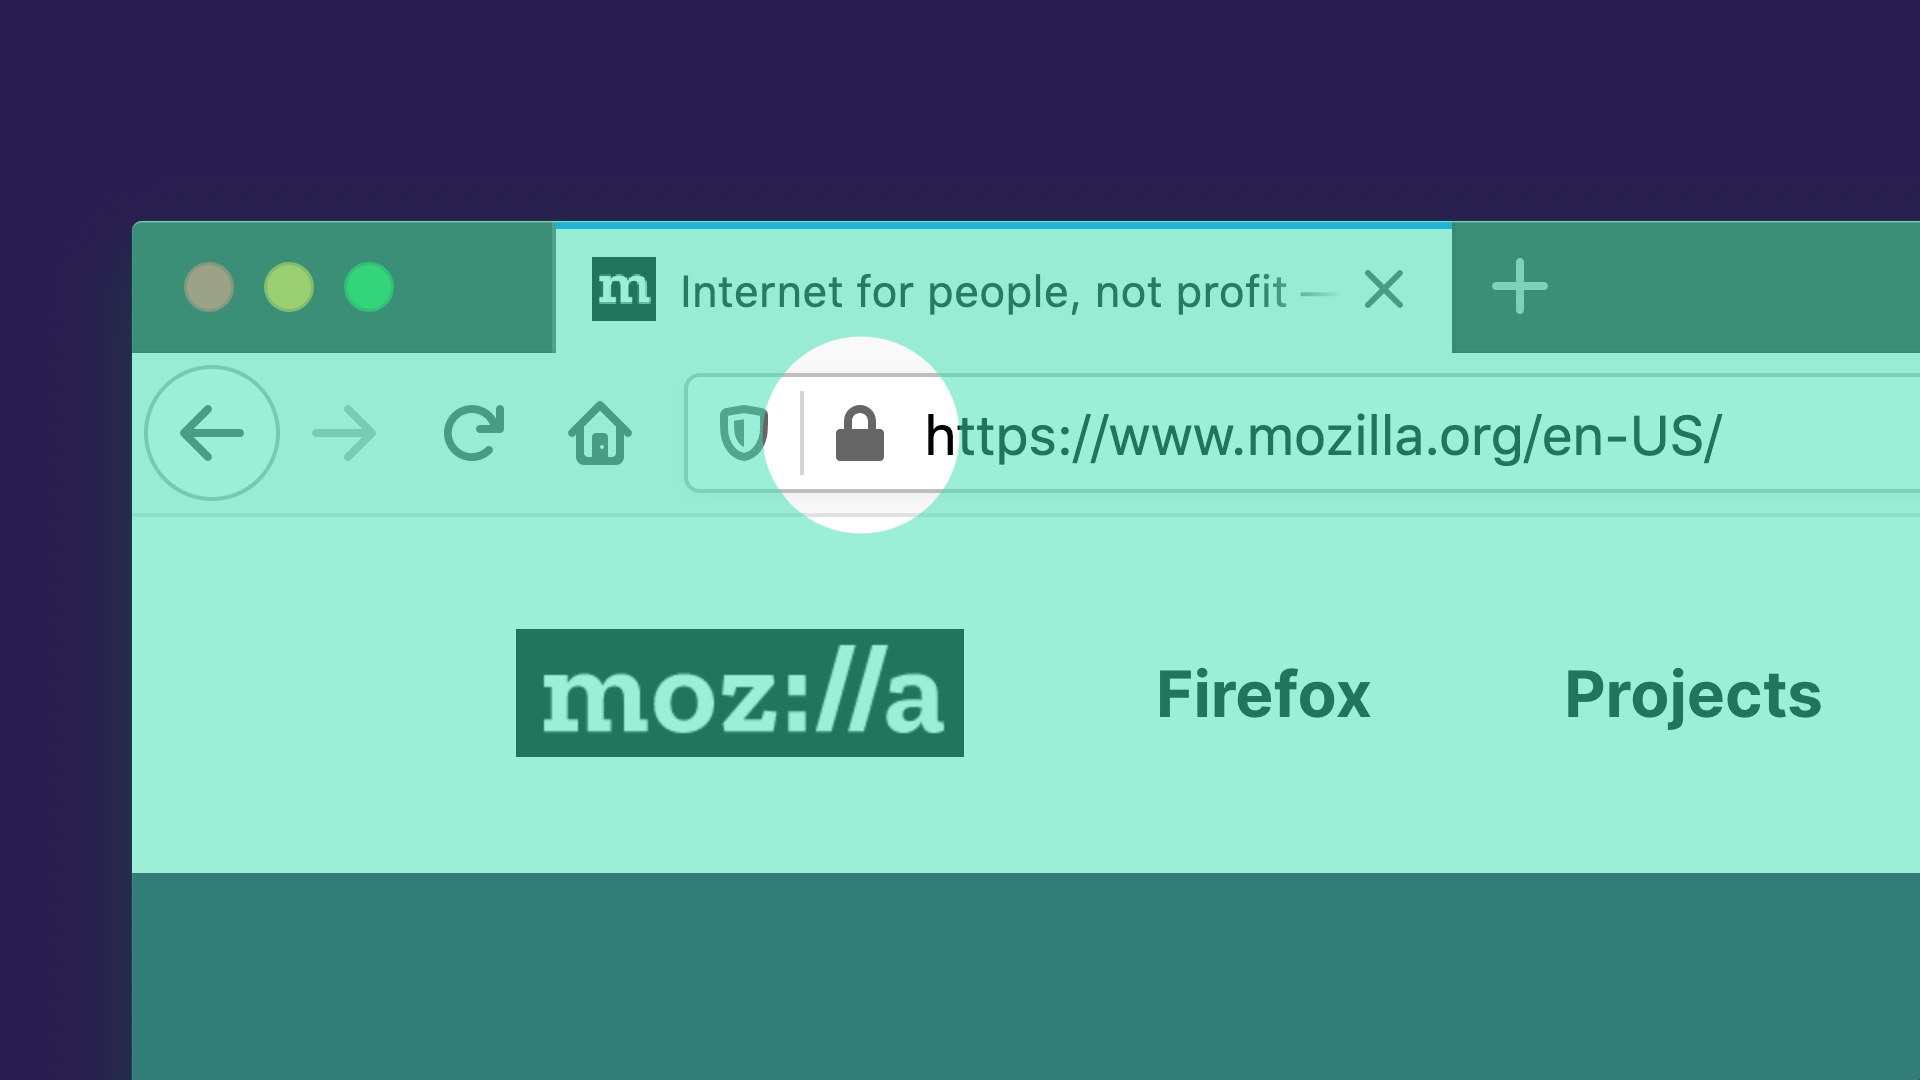 firefox keeps saying insecure connection